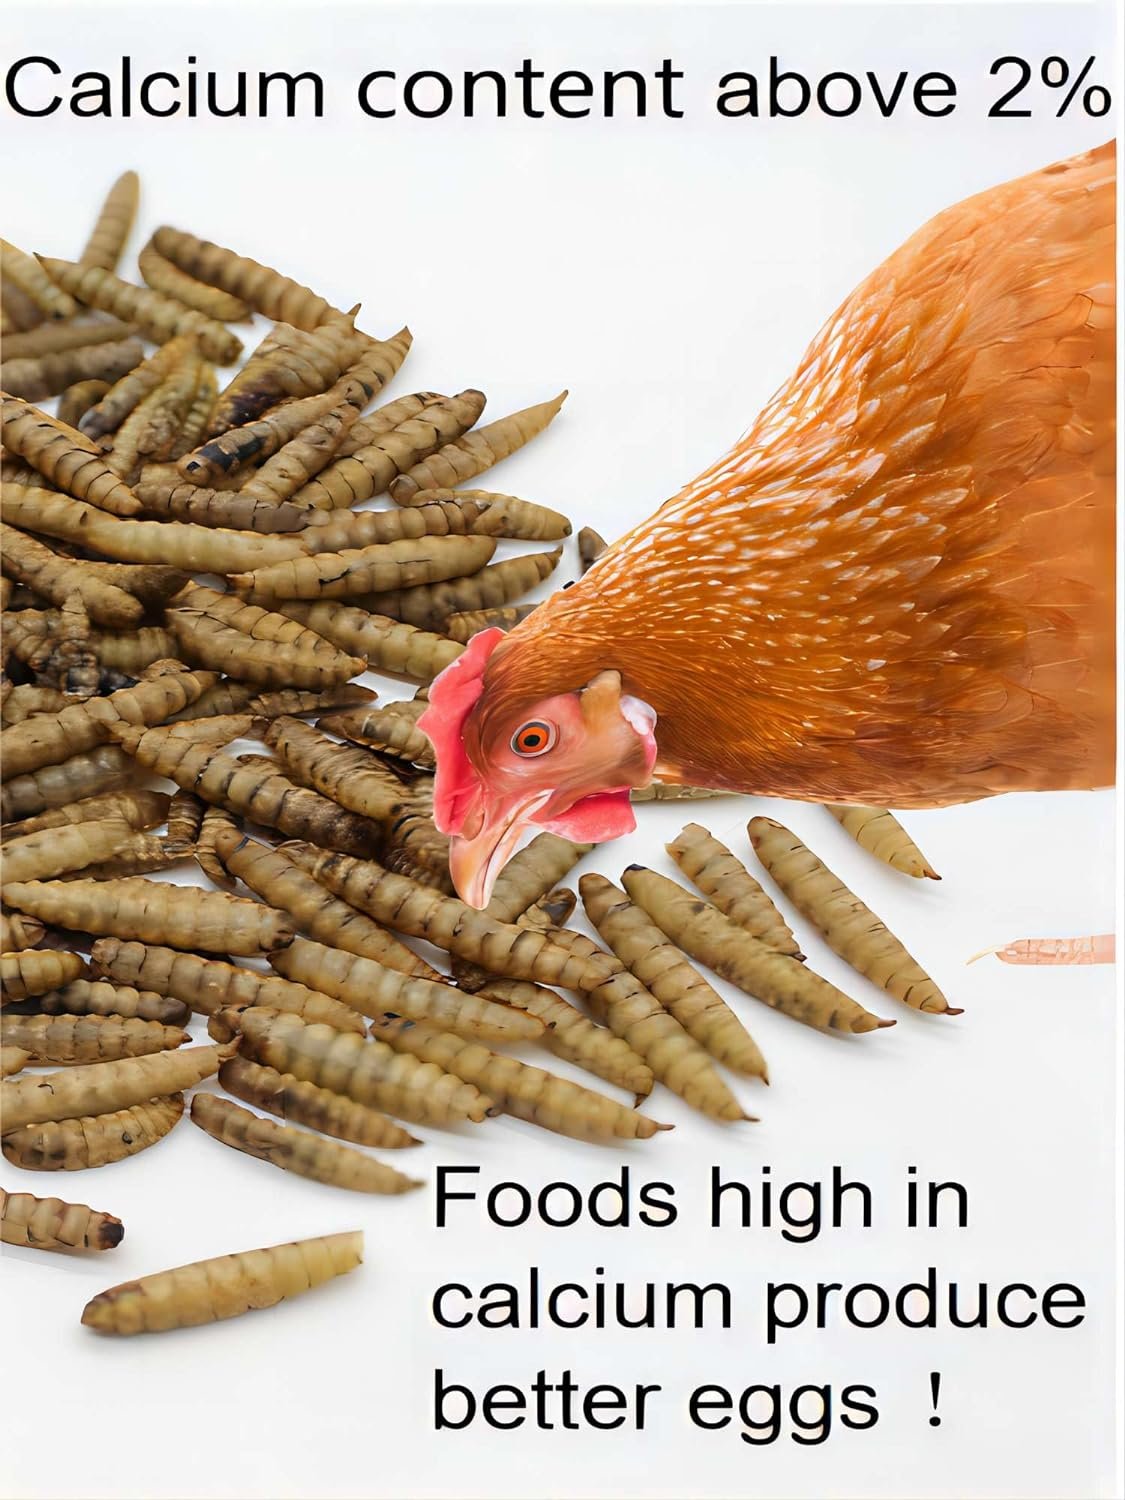 Classic Flock 5LB BSF Larvae -50X More Calcium Than Mealworms Non-GMO Poultry Feed for Chickens, Hens, Ducks